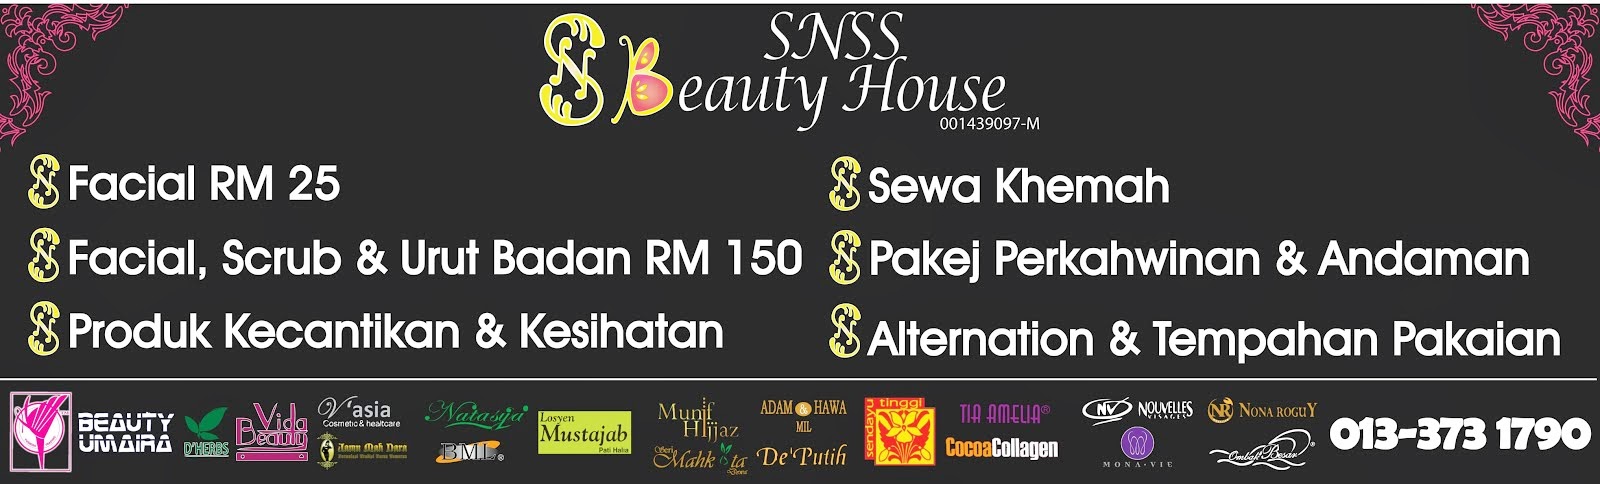 SNSS Beauty House